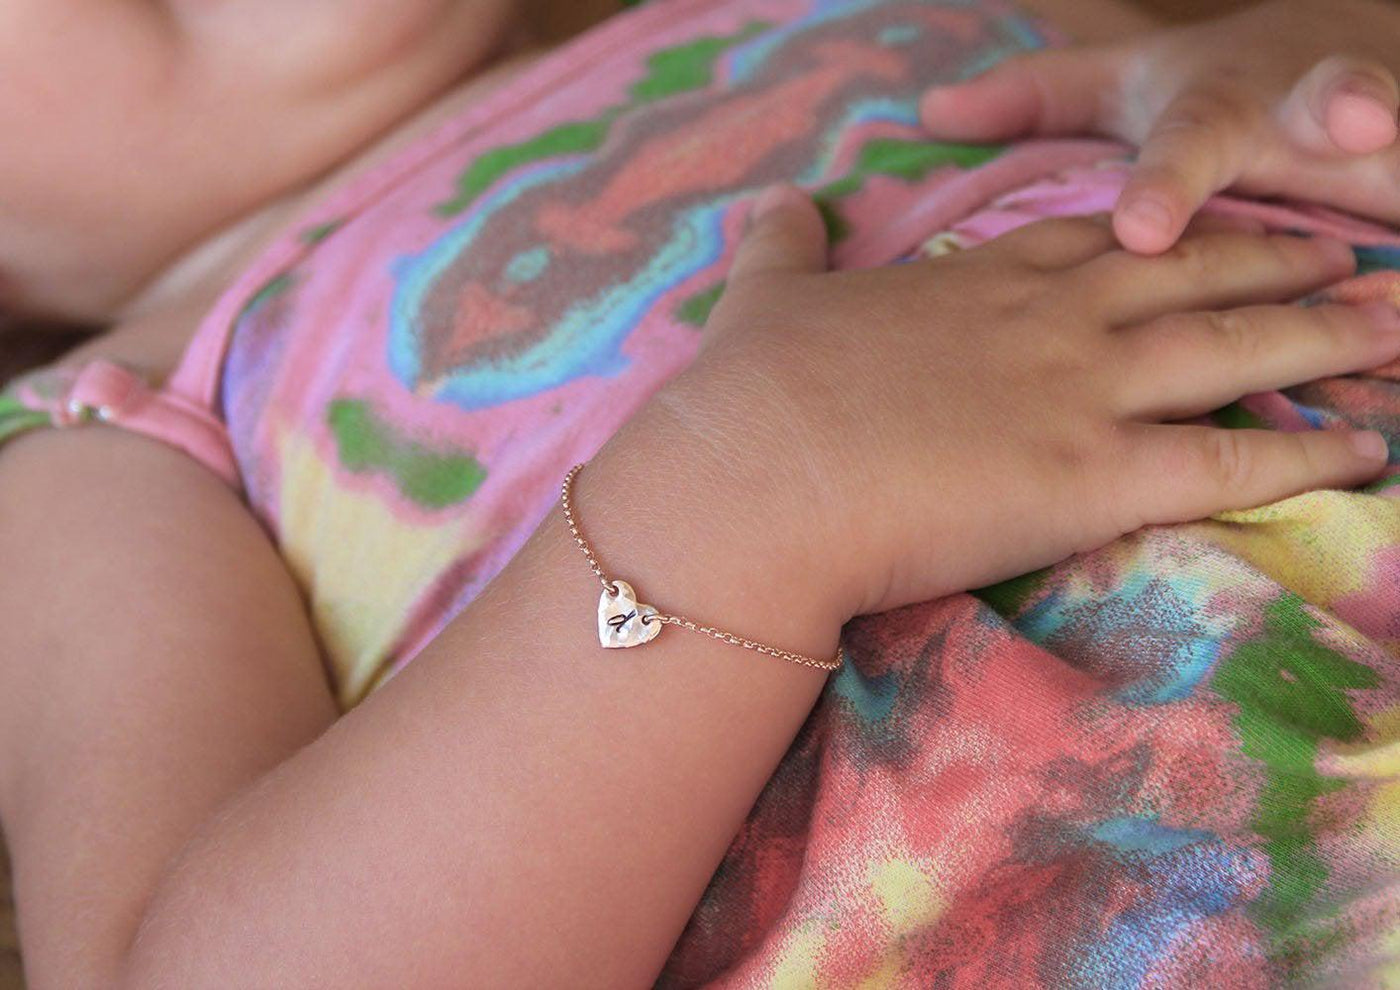 Infant's rose gold chain bracelet with heart charm and personalized initial letter